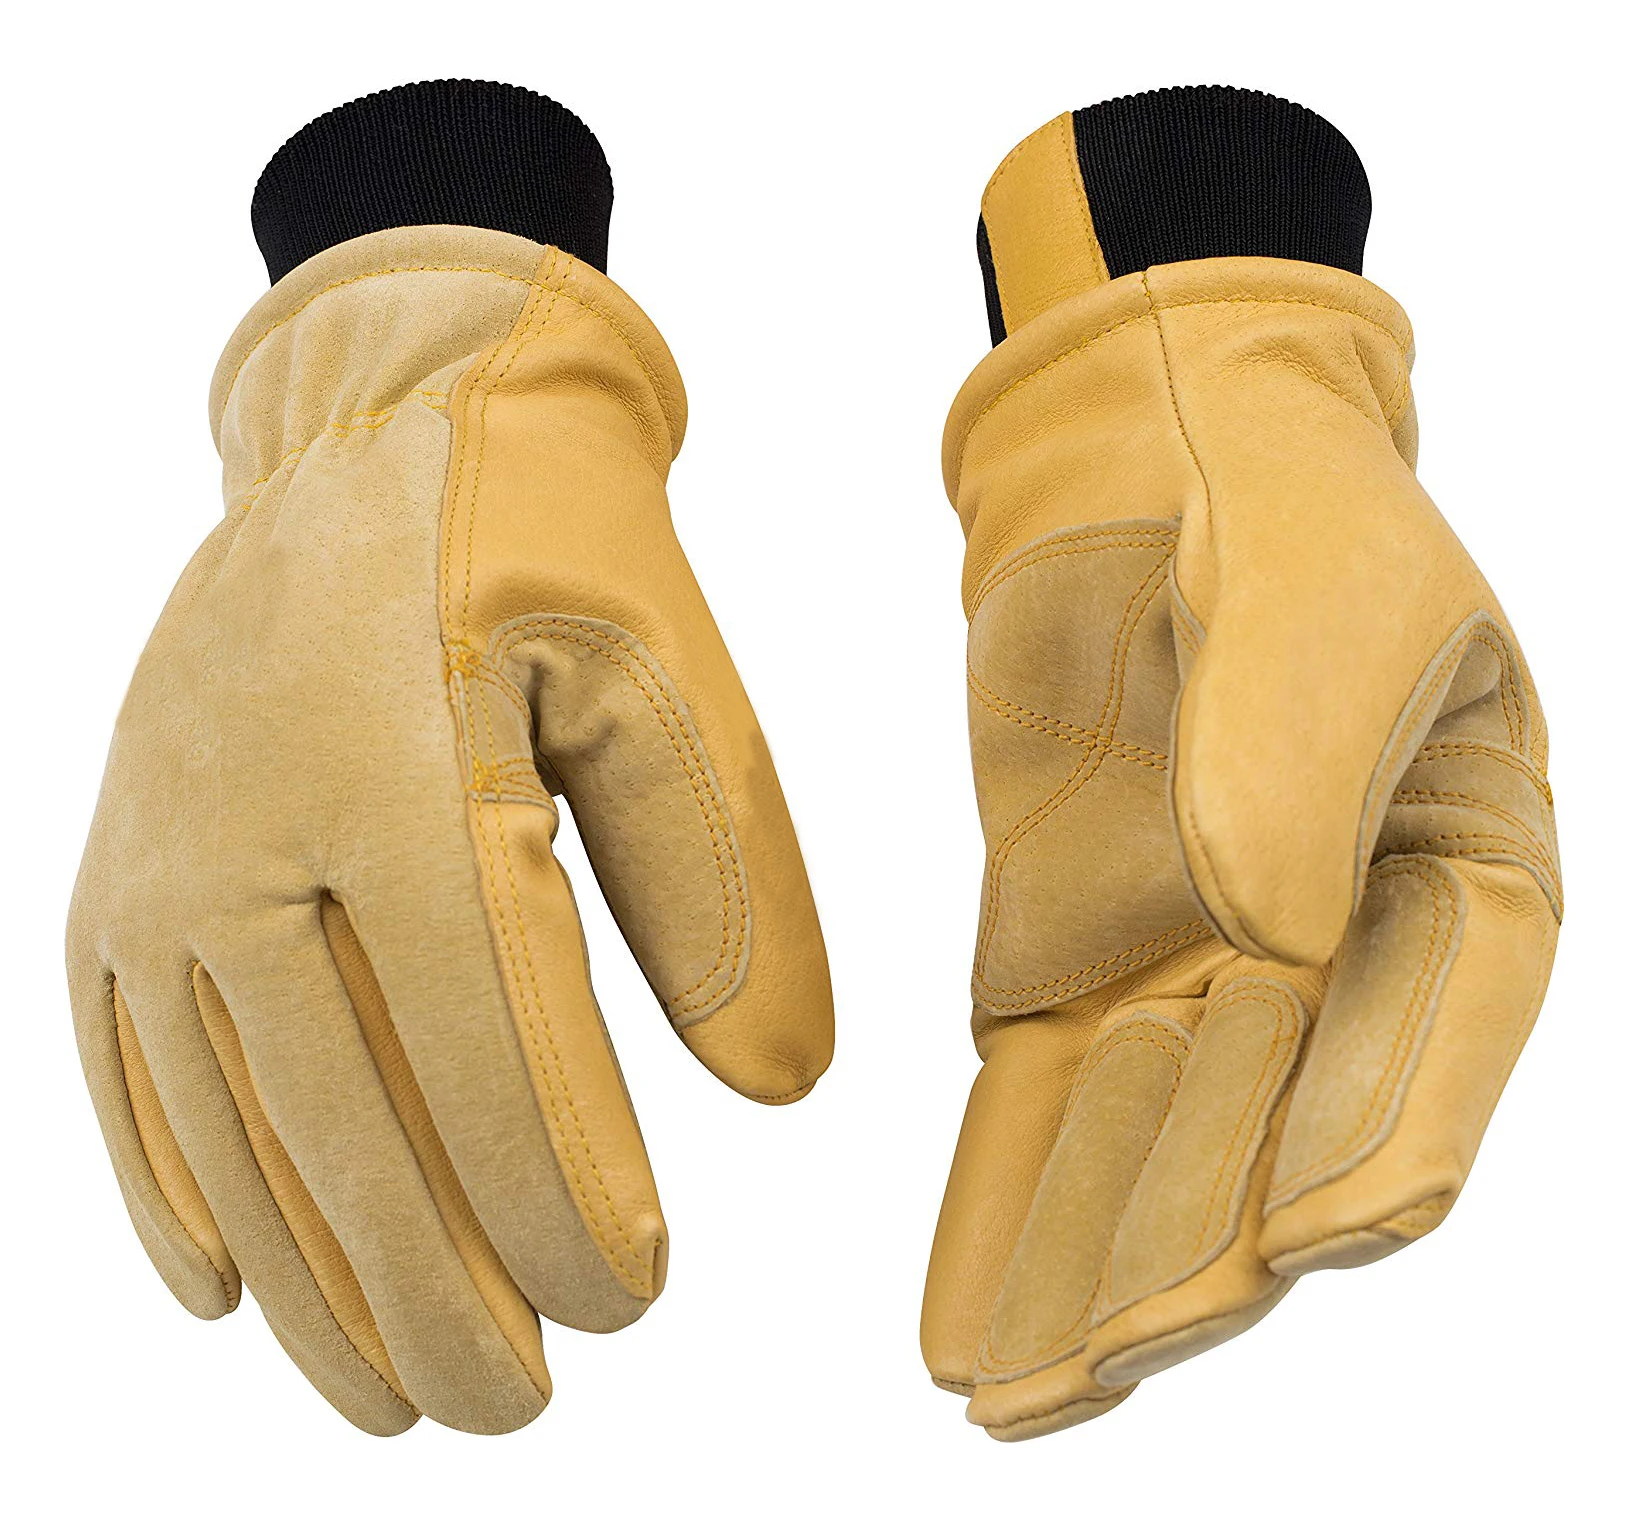 Warm Winter Work Gloves Thermal Insulated Freezer Gloves All Sizes 